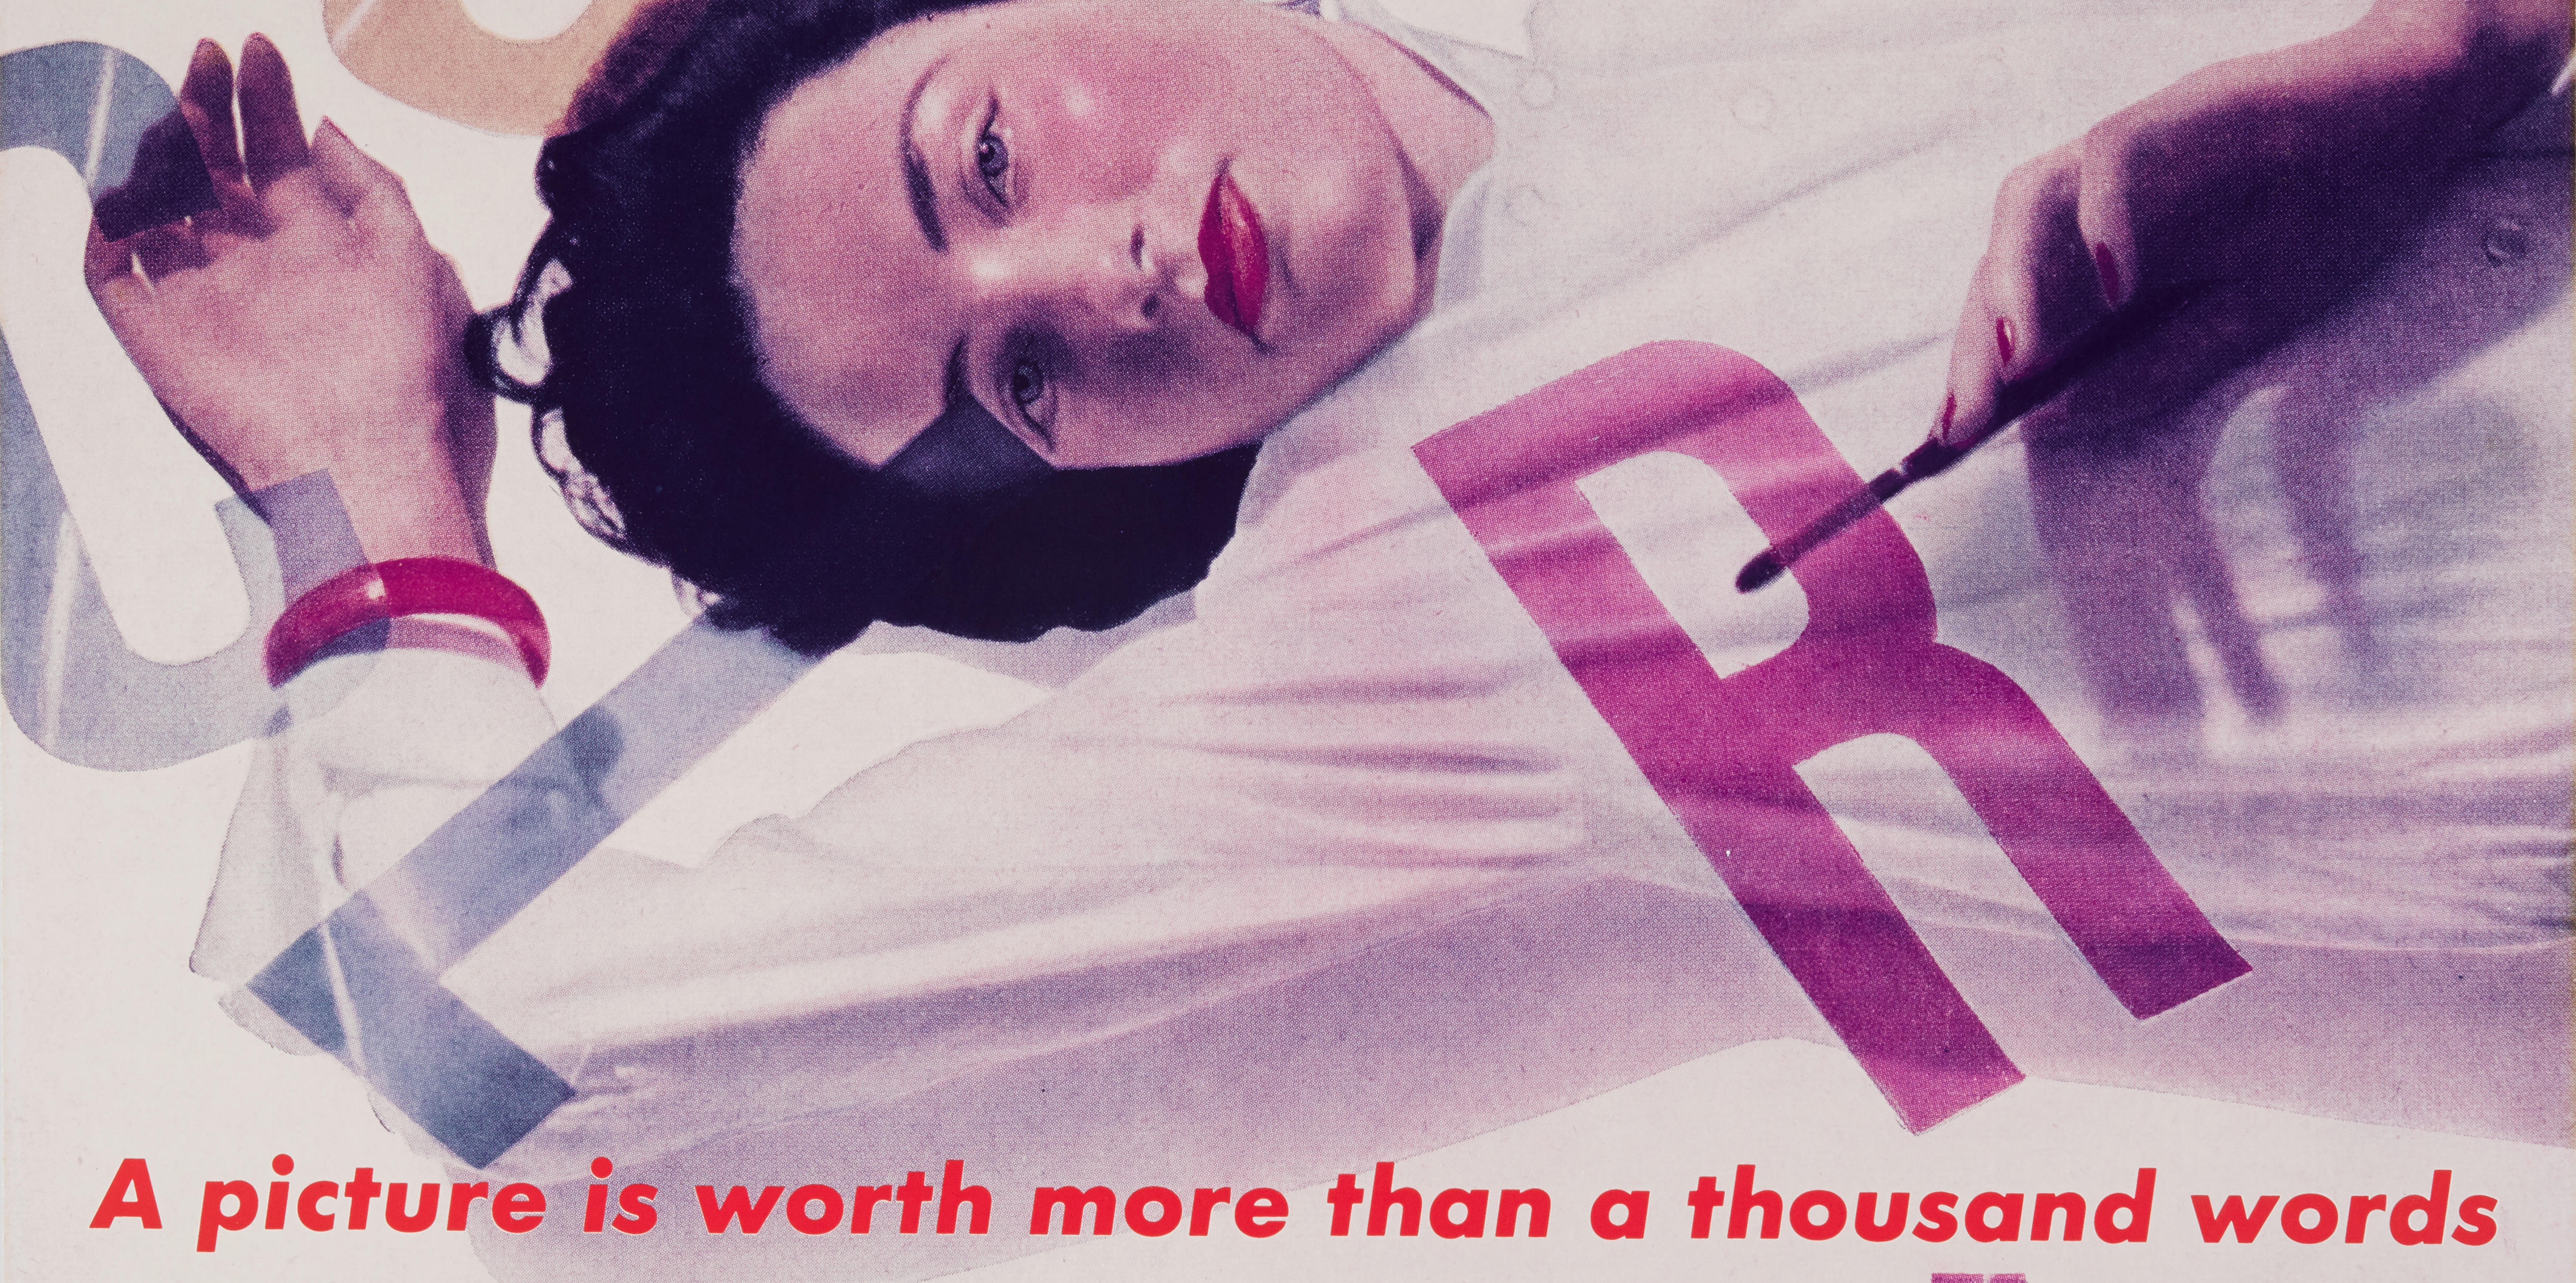 BARBARA KRUGER (b. 1945) Untitled (A picture is worth more than a thousand words), 1987